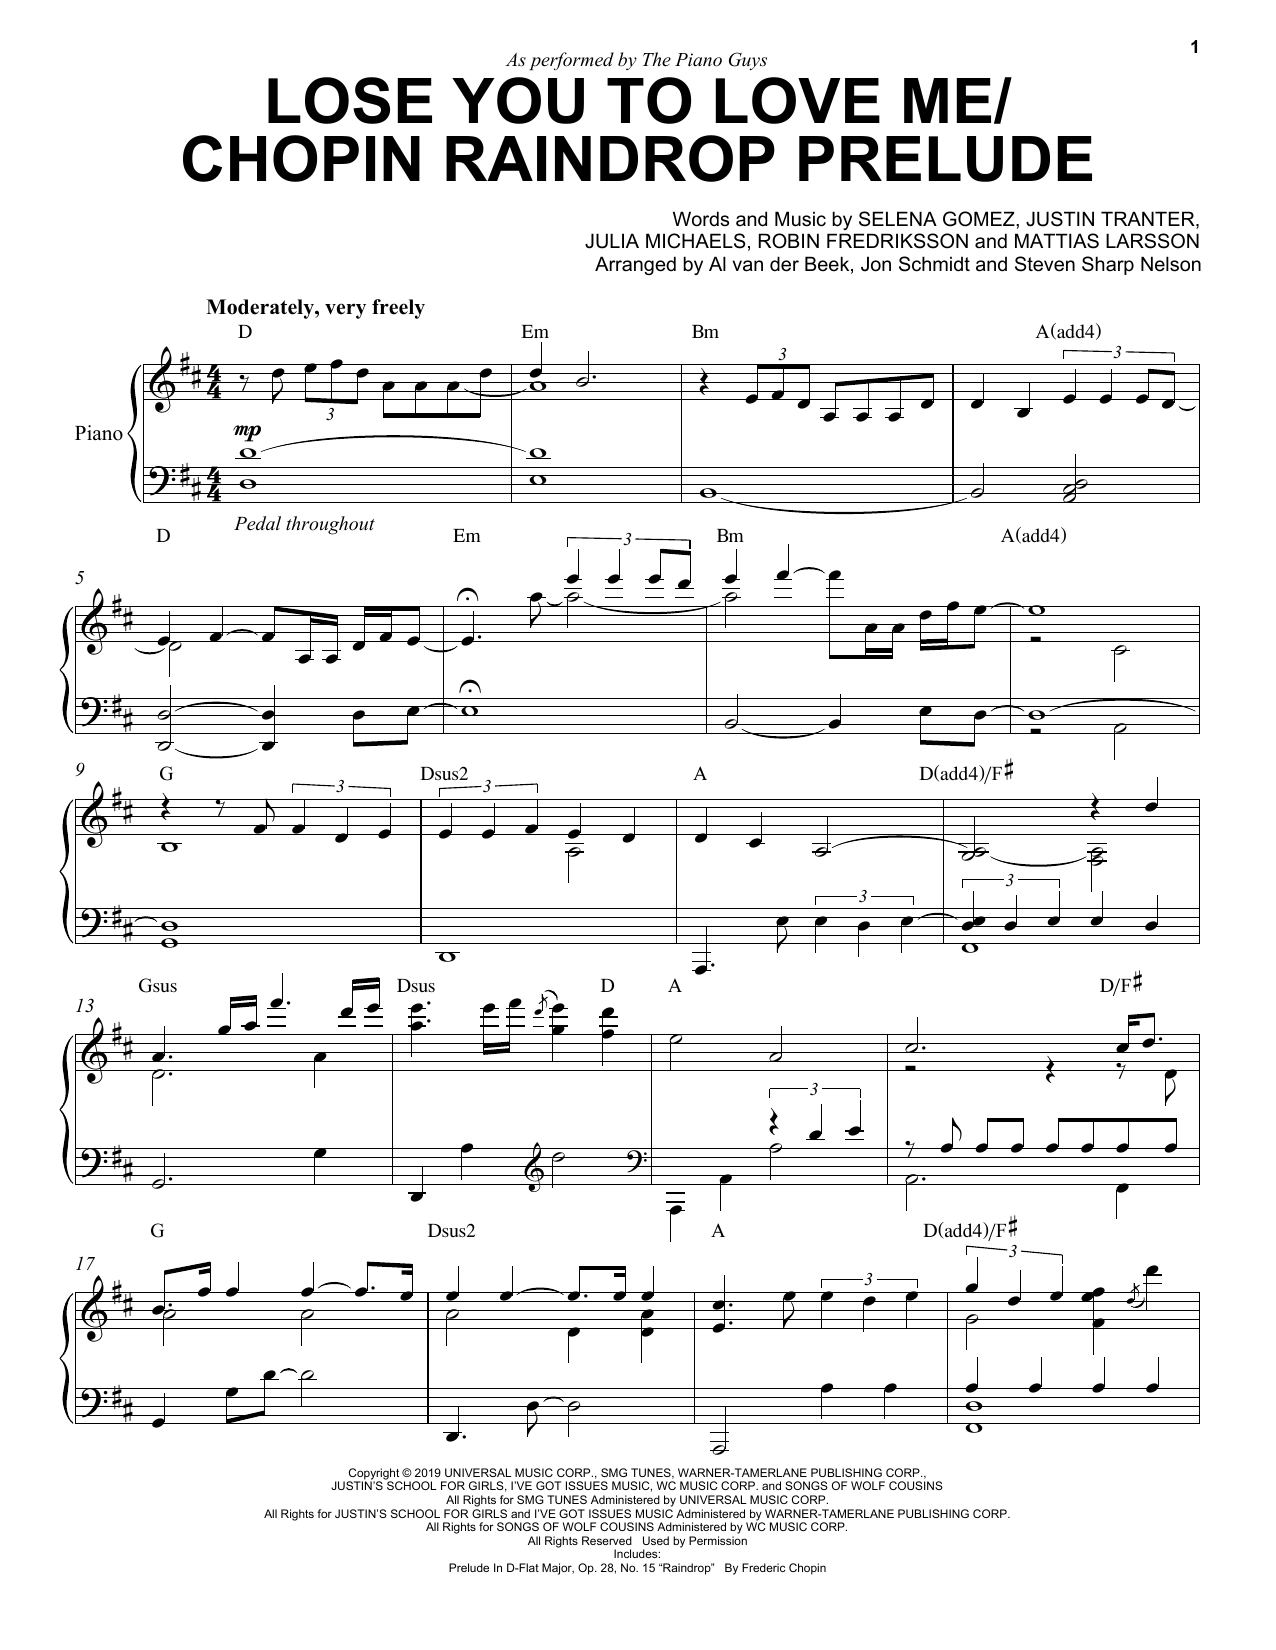 Download The Piano Guys Lose You To Love Me/Chopin Raindrop Pre Sheet Music